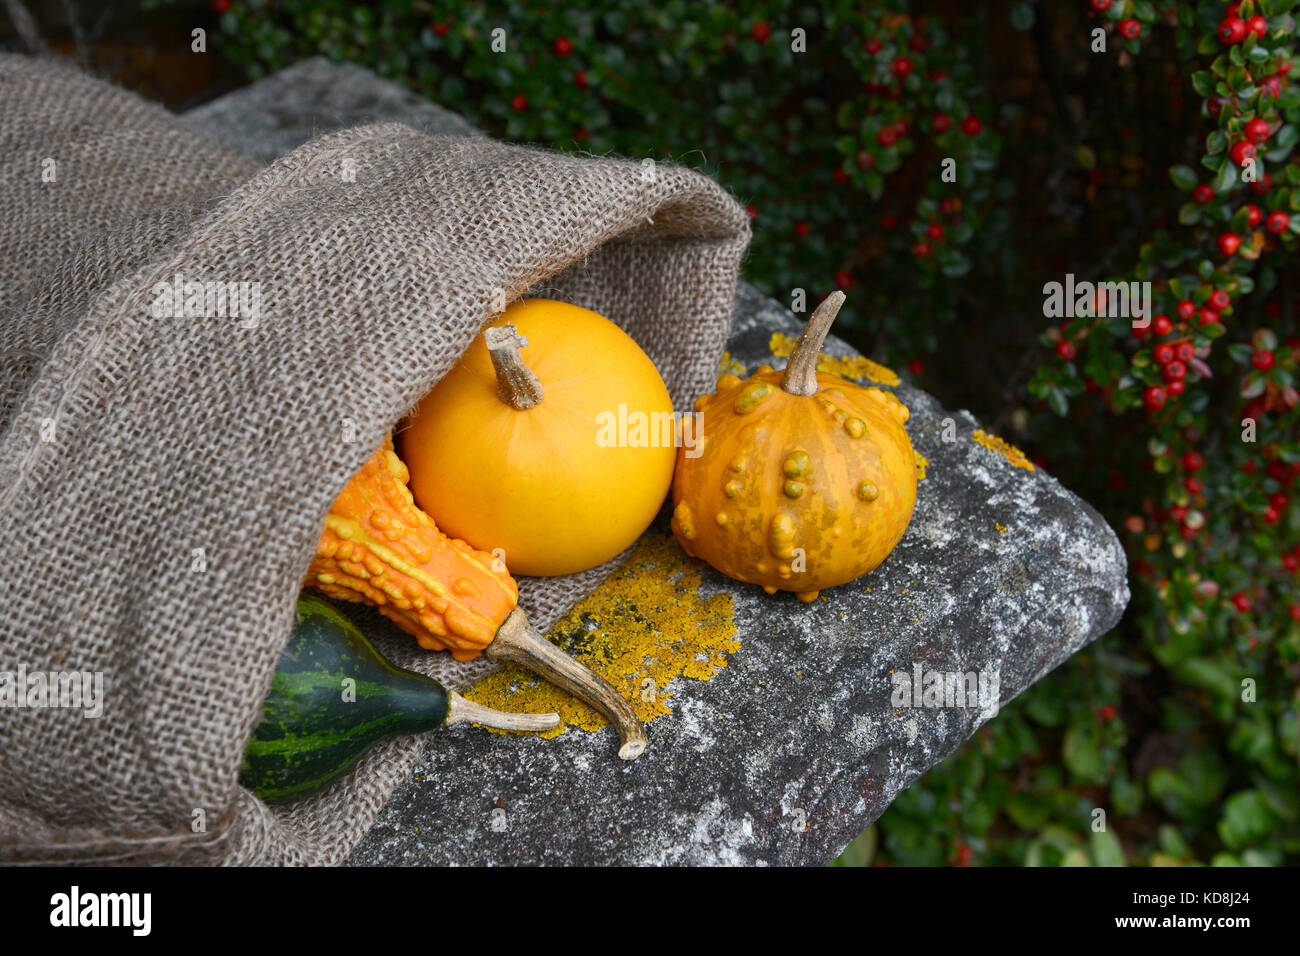 Warty ornamental gourd with jute sack of colourful squashes on a lichen-covered stone seat Stock Photo